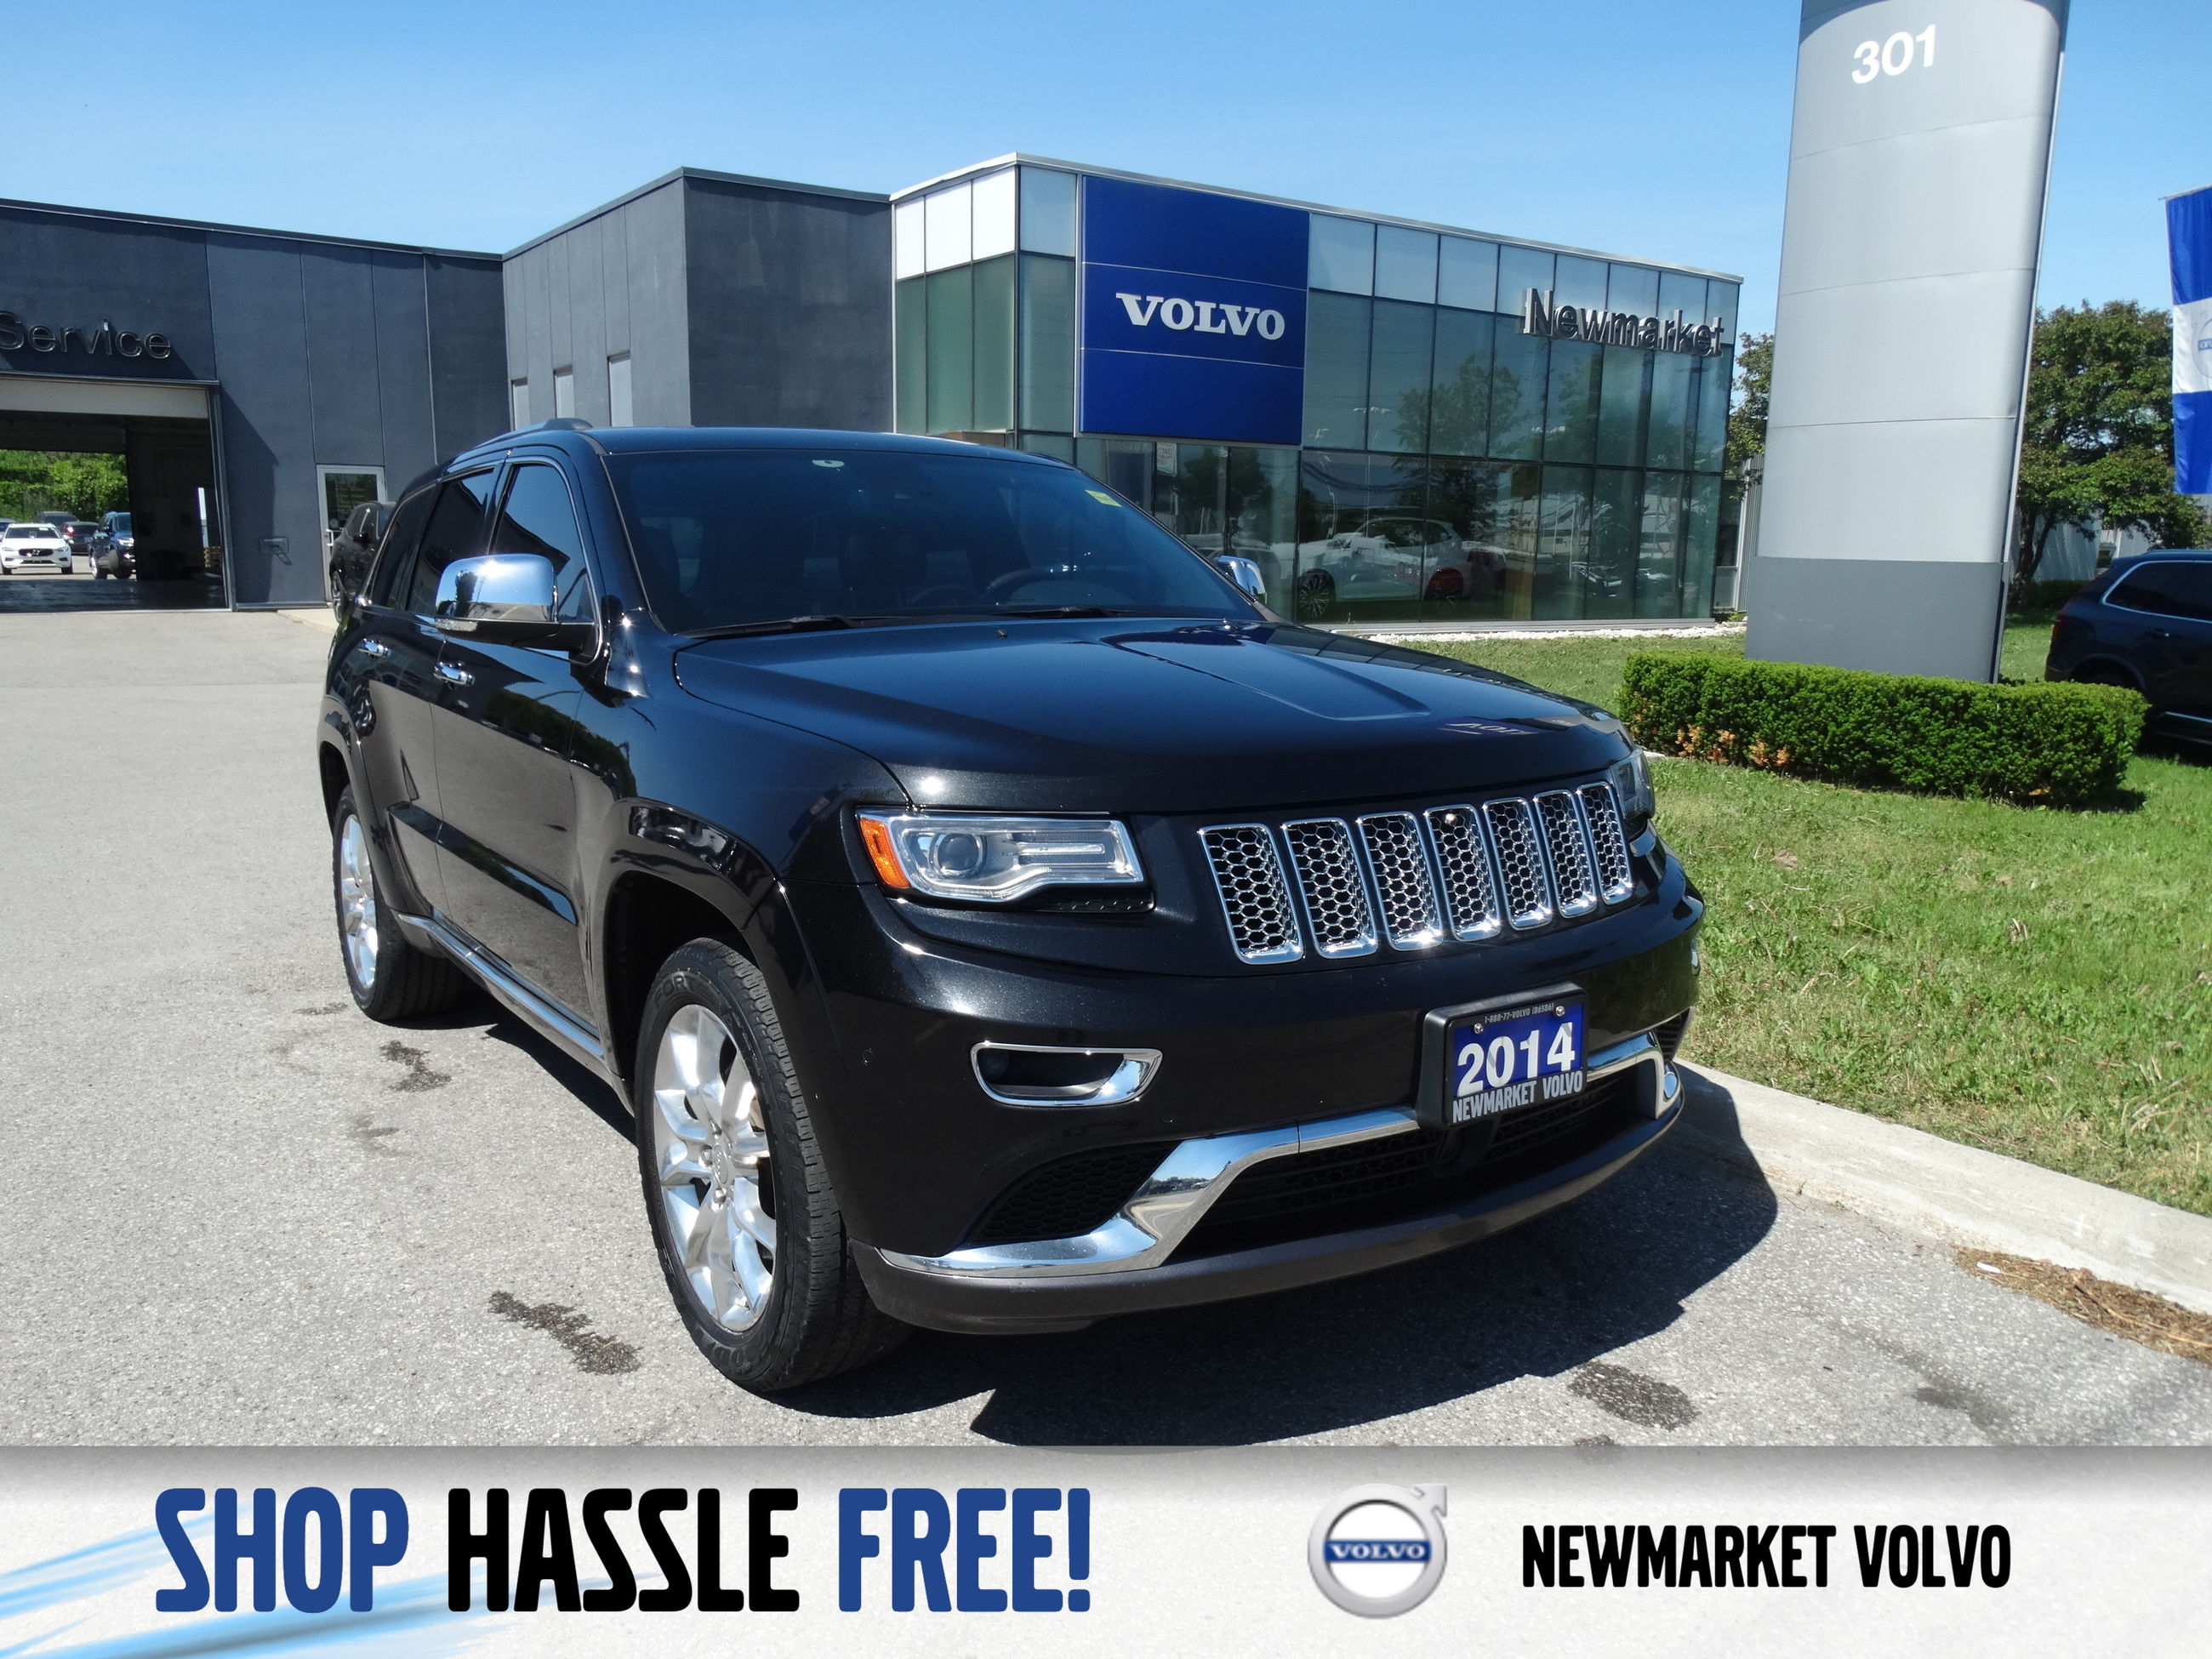 Used 14 Jeep Grand Cherokee 14 Jeep Grand Cherokee 4wd 4dr Summit 698 0 Newmarket Volvo